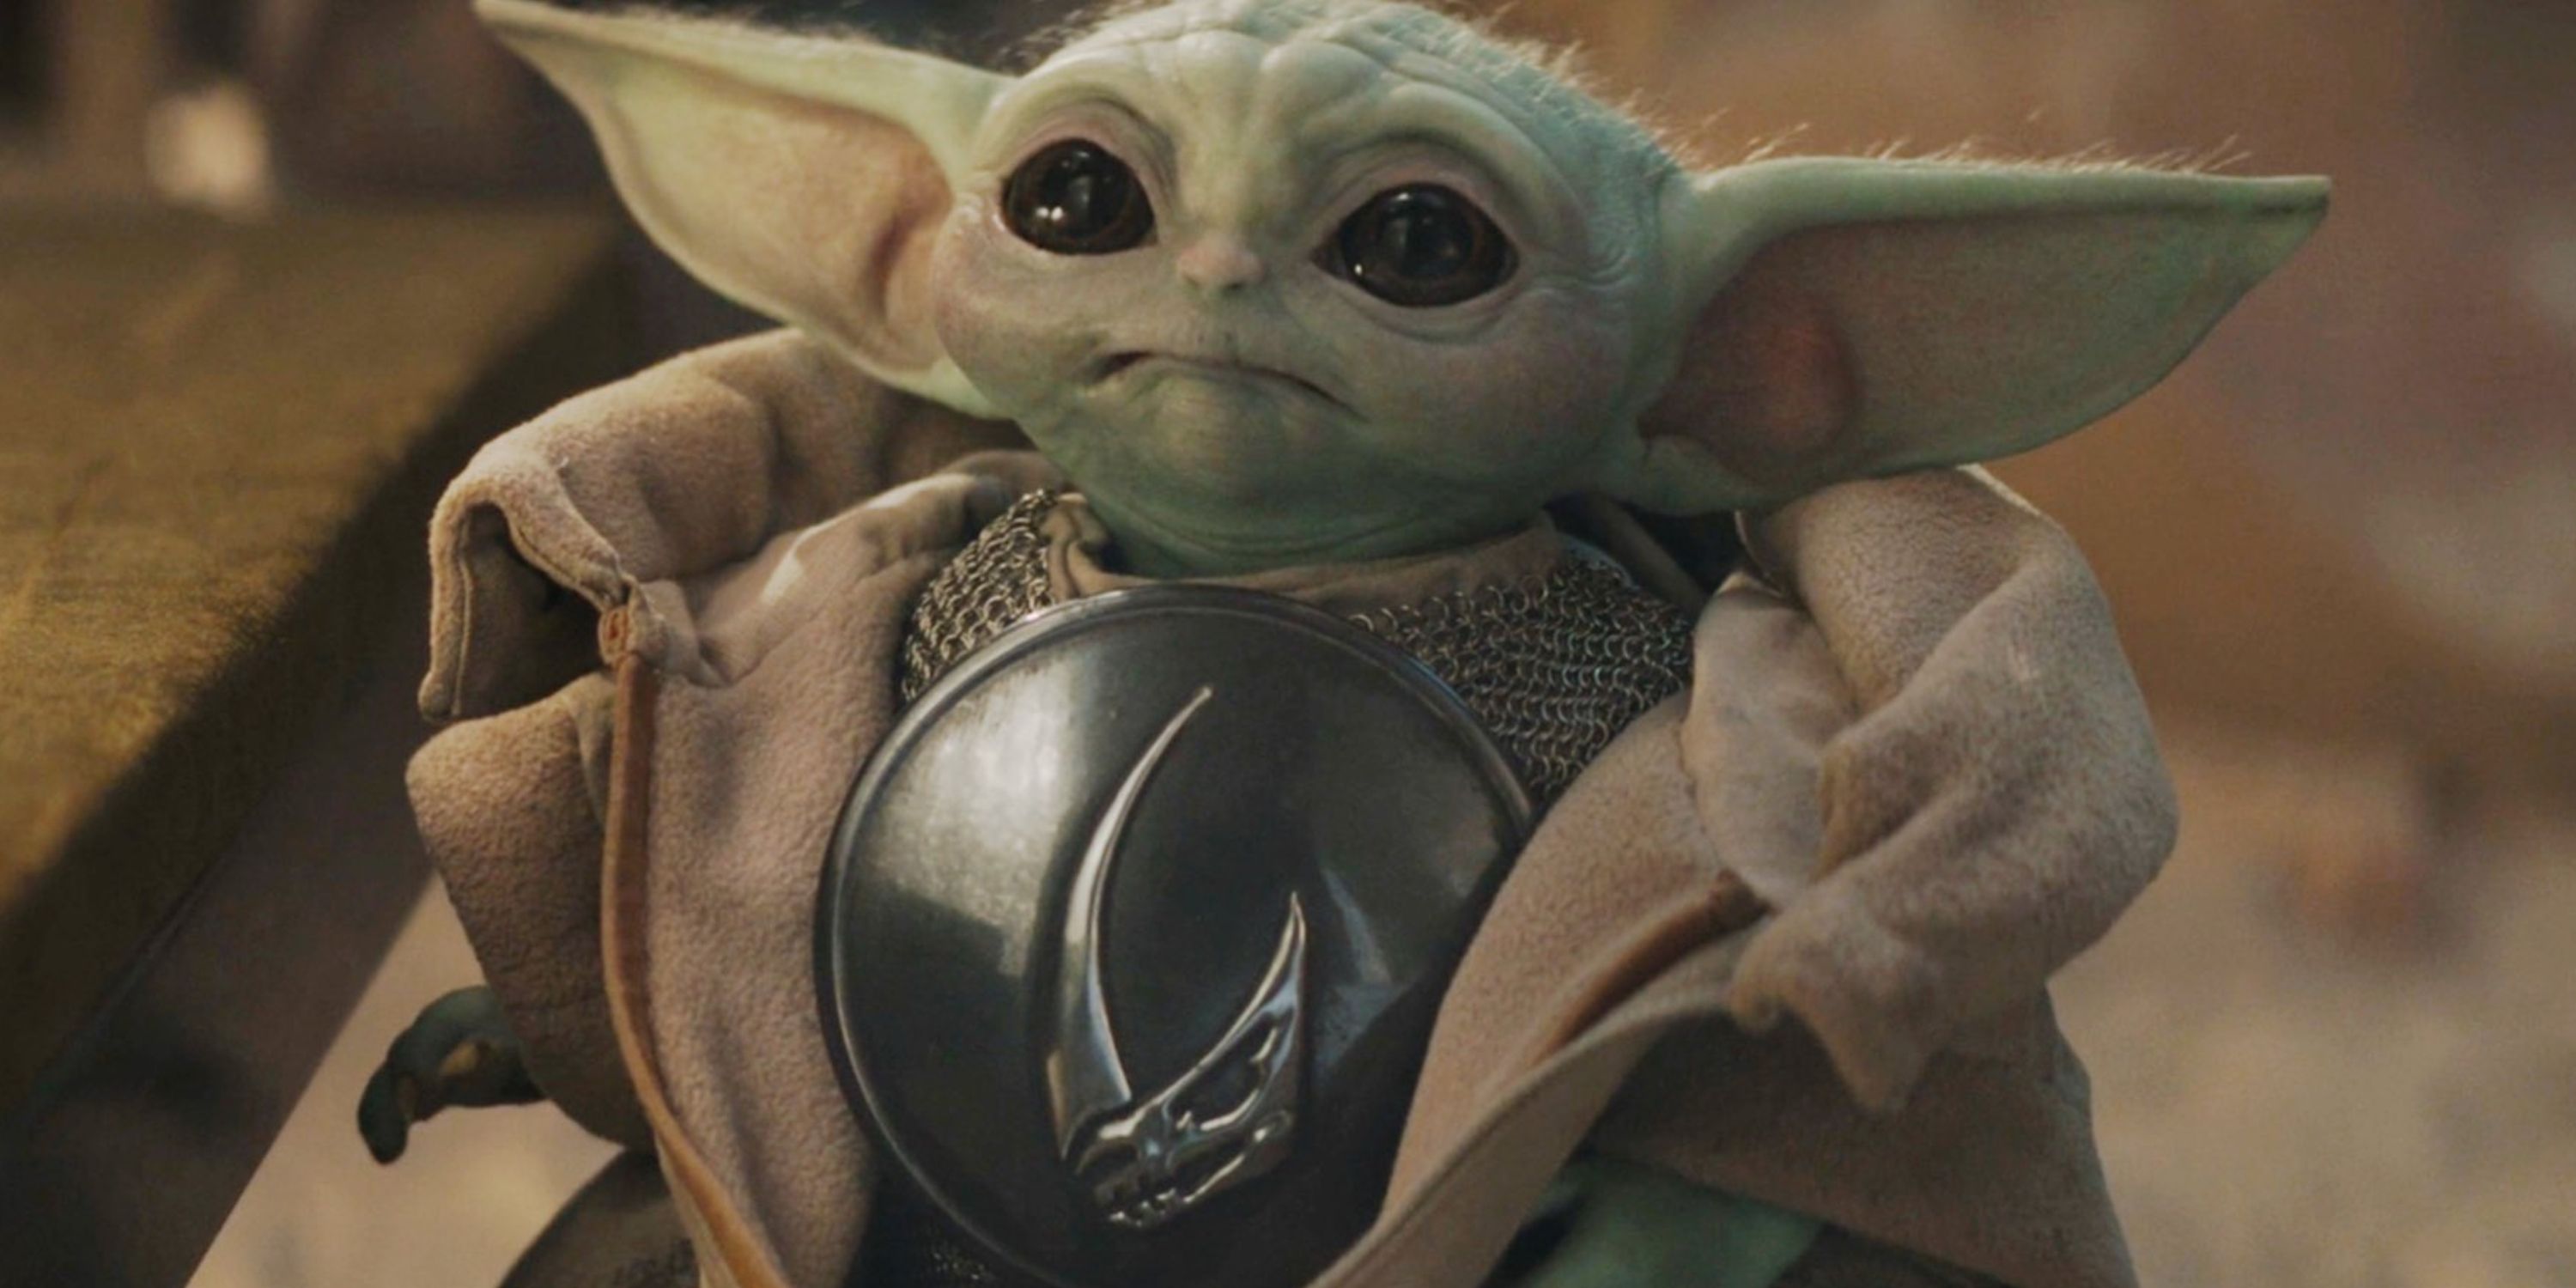 The Mandalorian, What species is Baby Yoda?